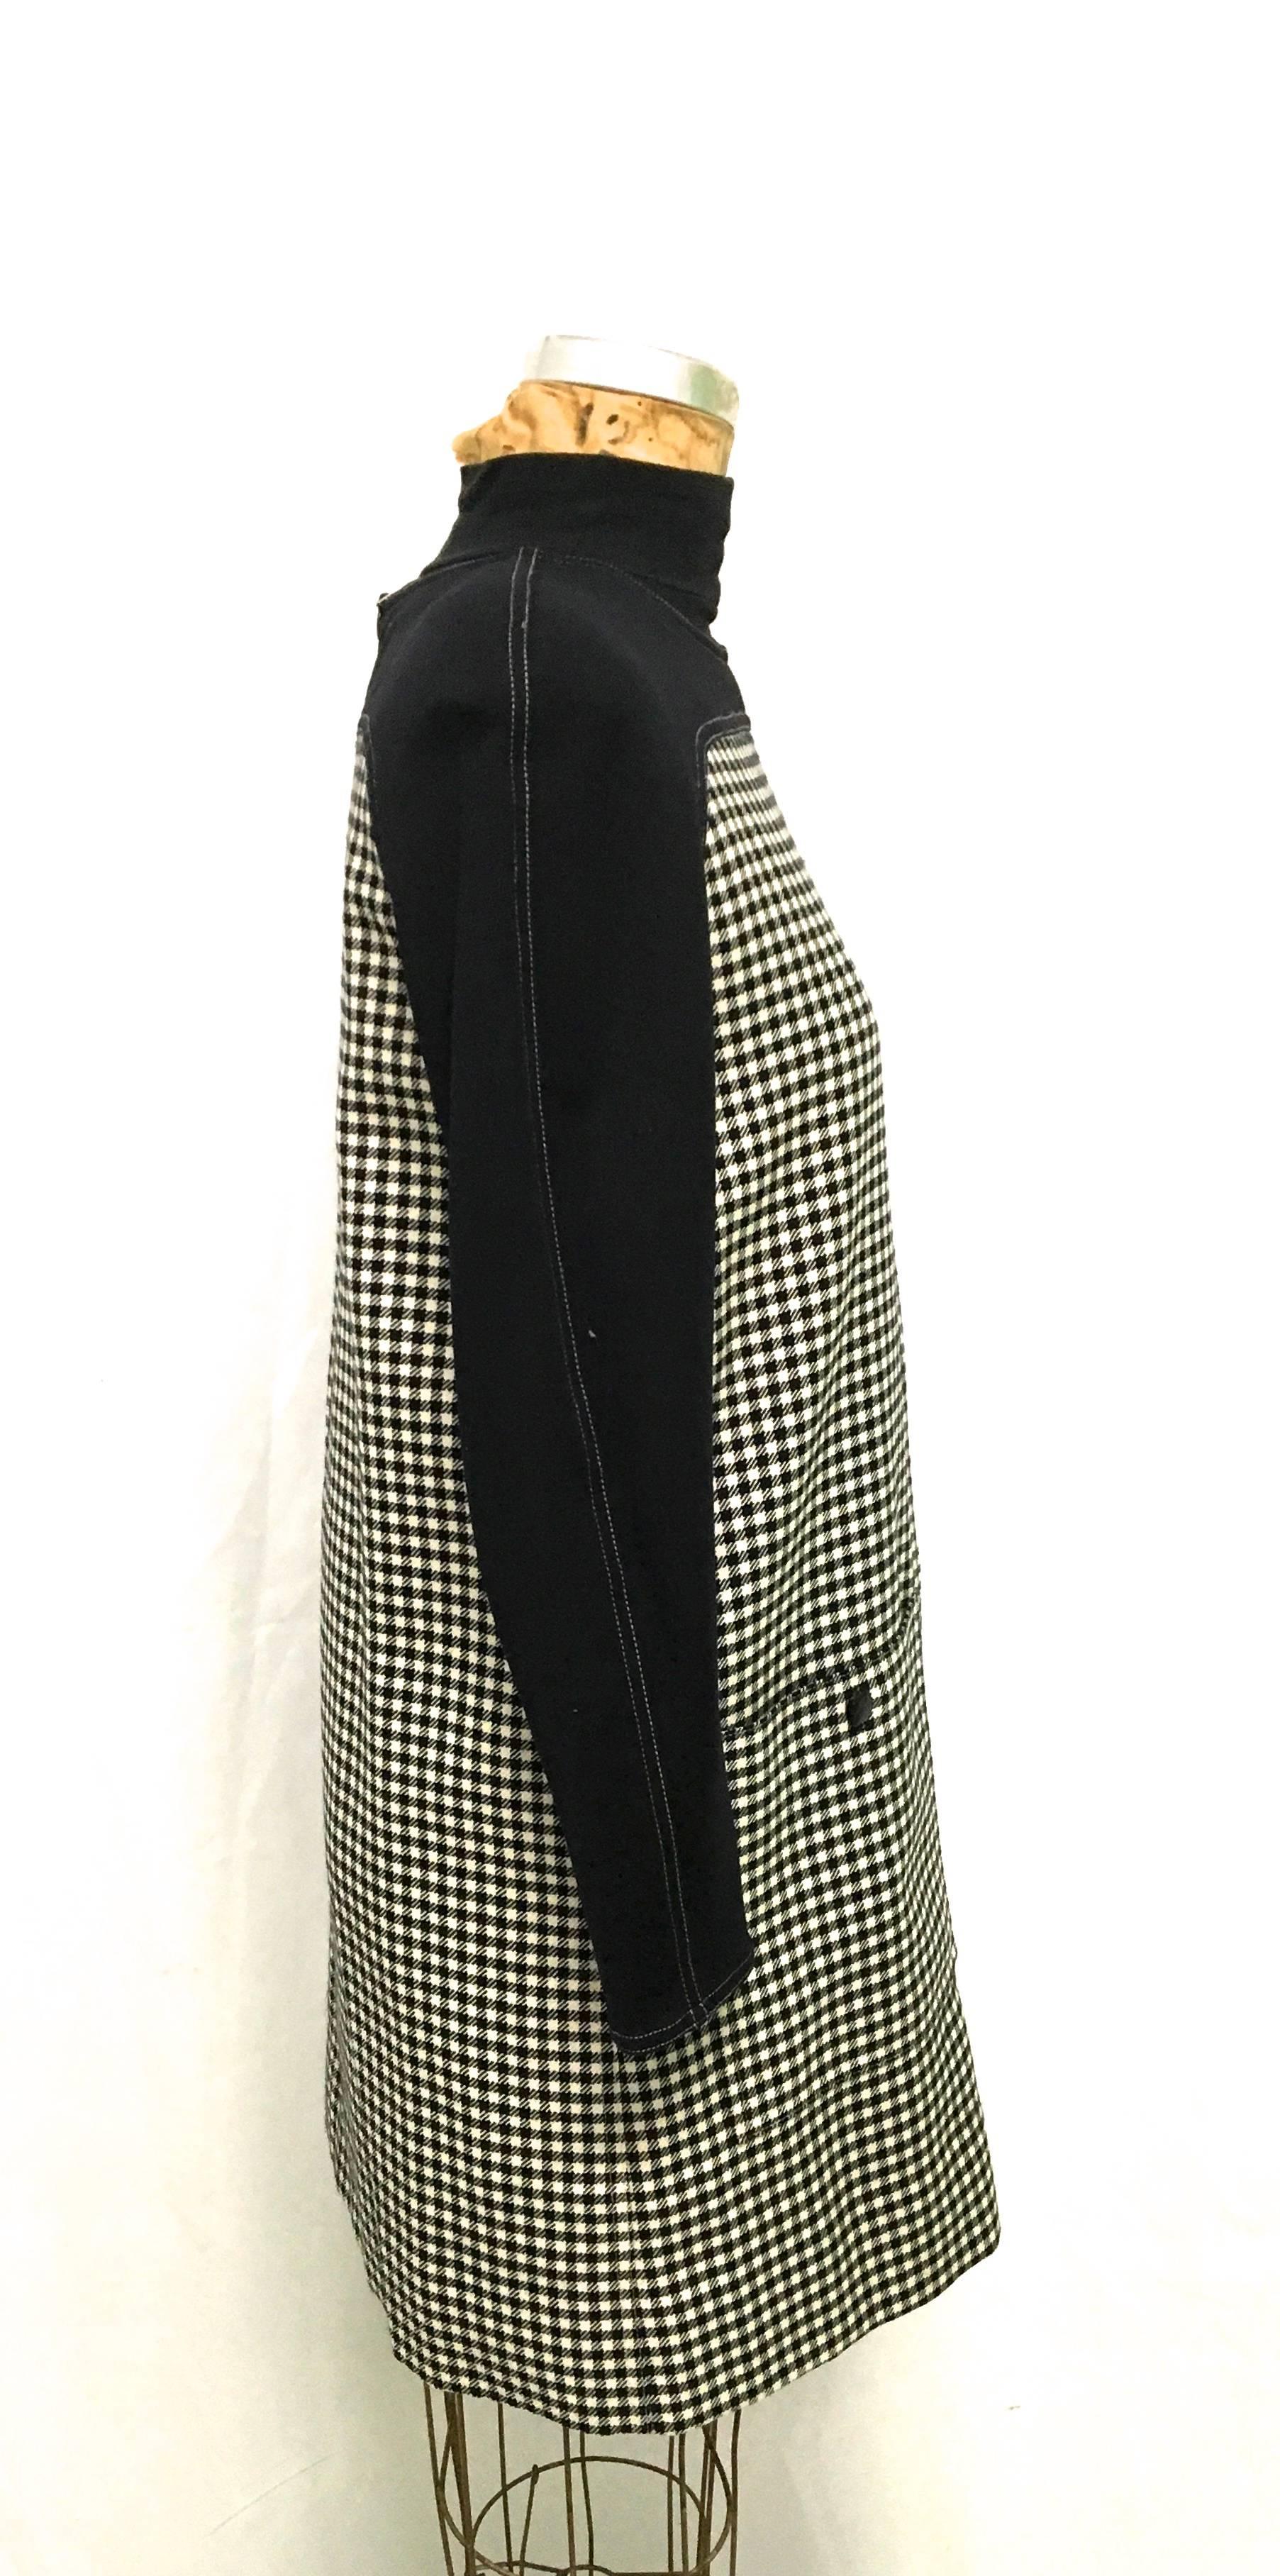 Courreges Dress - Black and White  In Excellent Condition For Sale In Boca Raton, FL